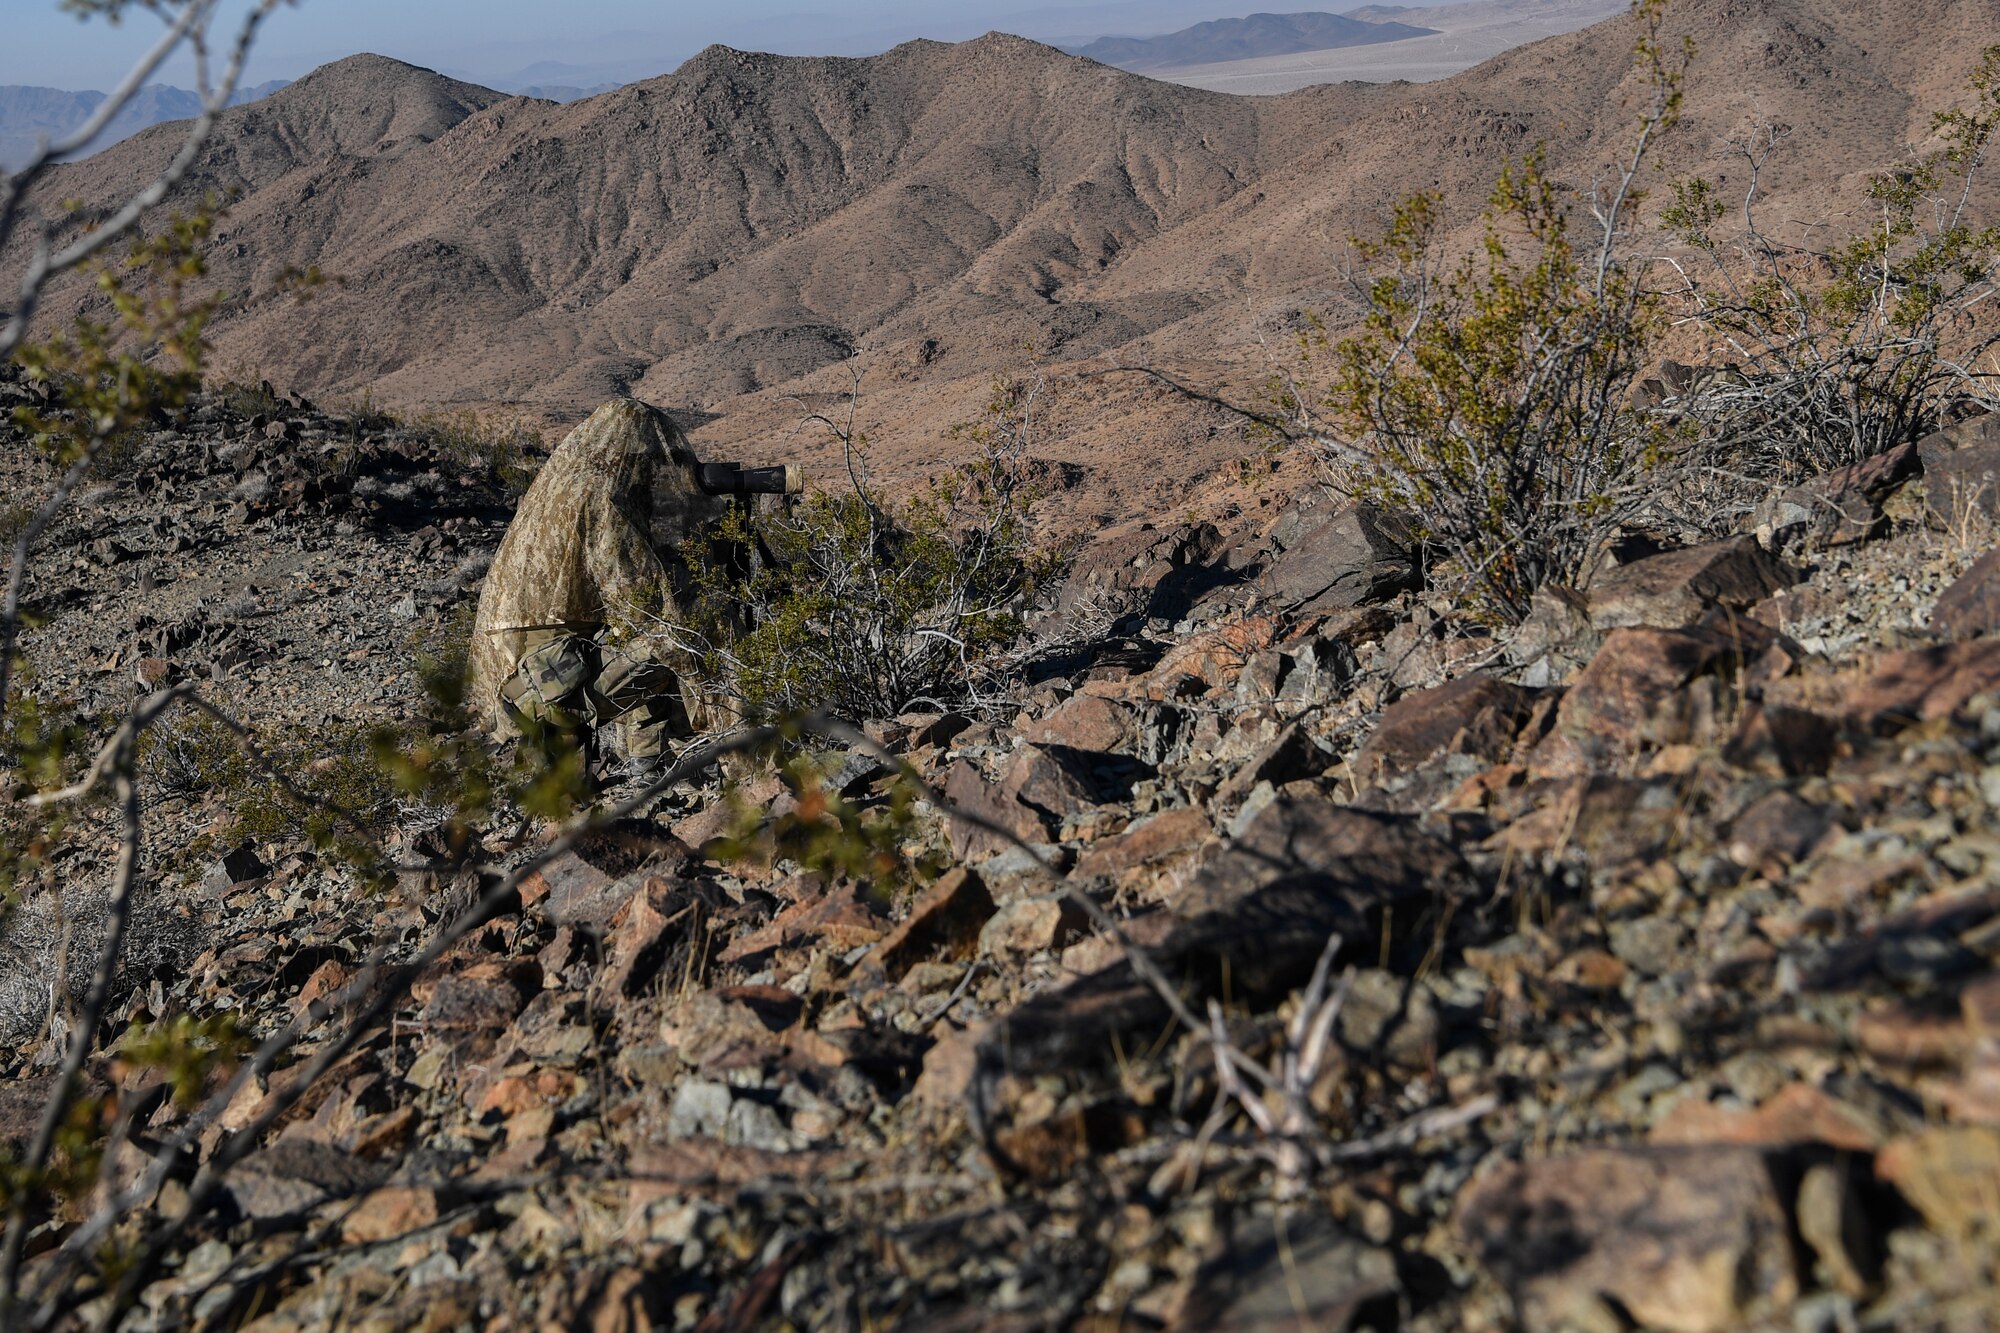 A Special Tactics operator with the 21st Special Tactics Squadron from Pope Army Airfield, Fort Bragg, North Carolina, observes enemy locations and movement through a scope during a scenario as part of NTC 18-10 at Fort Irwin, California, Sept. 1, 2018.